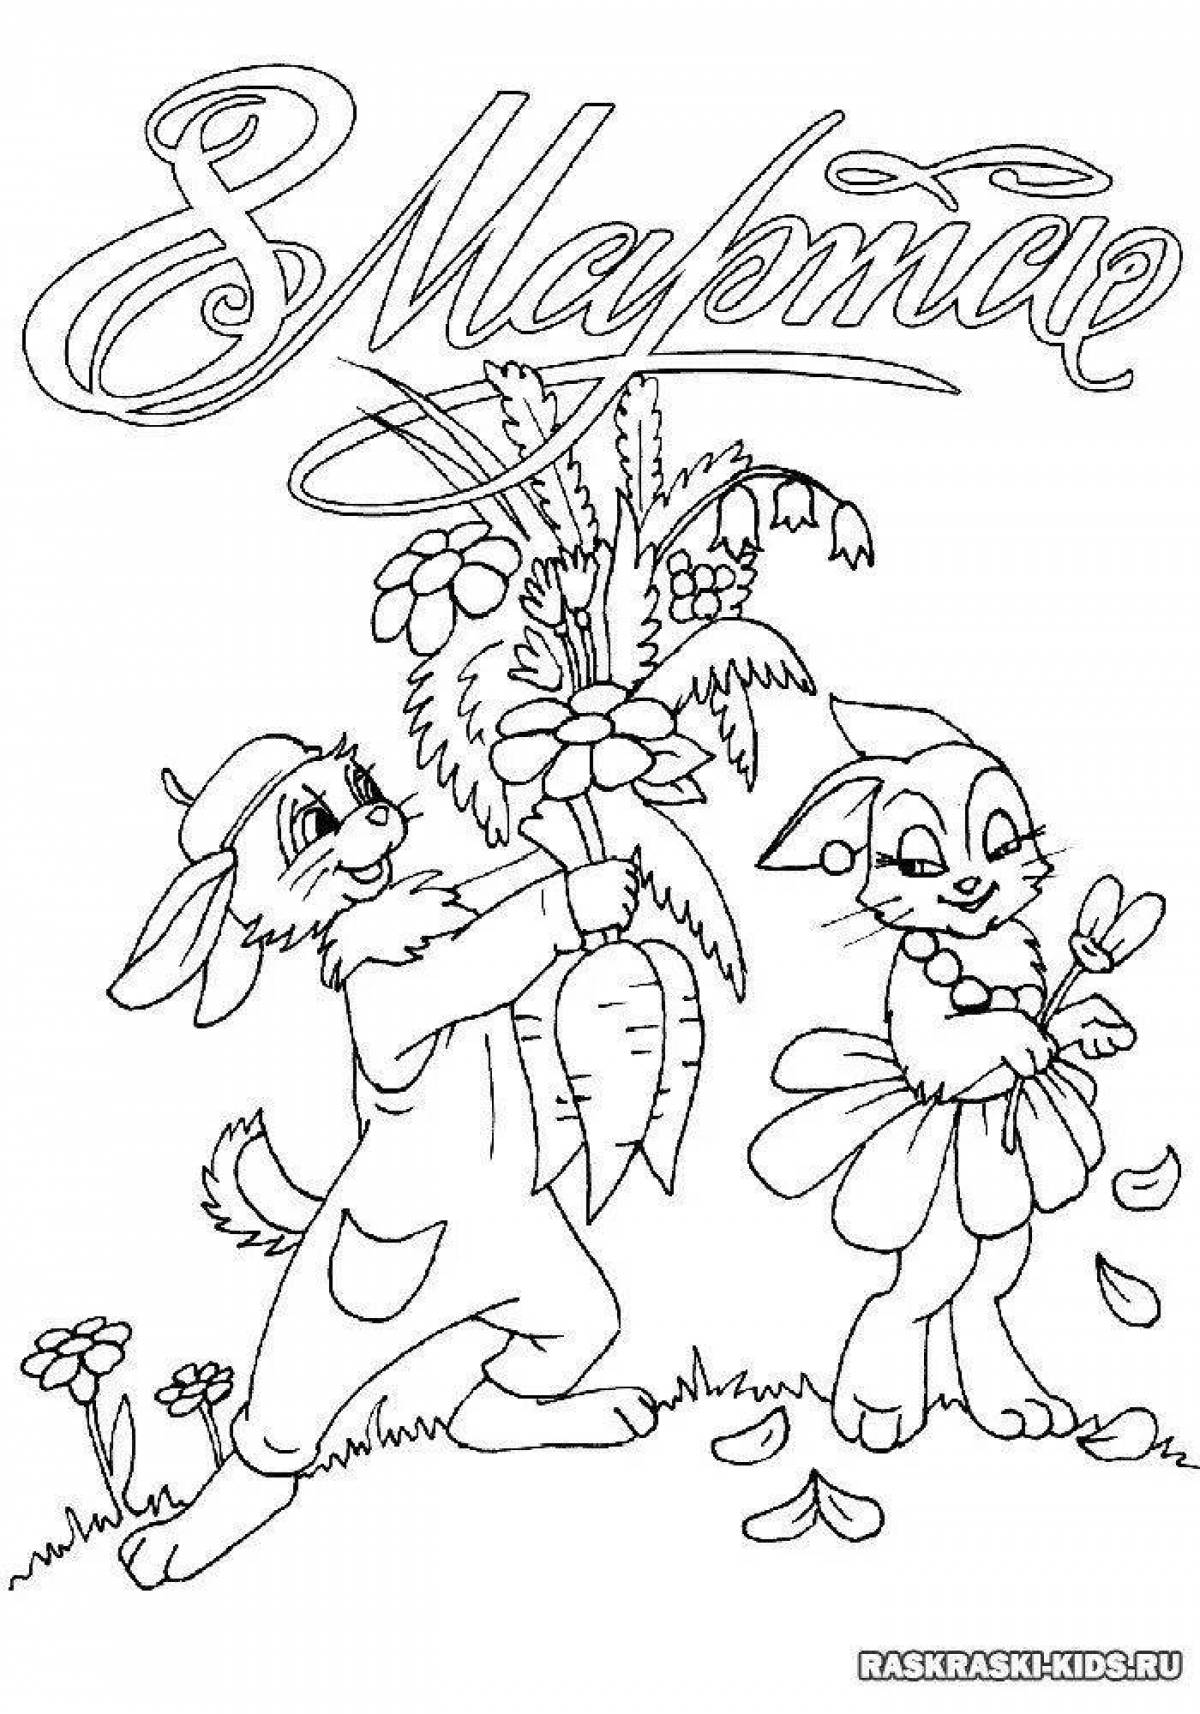 Coloring pages for March 8